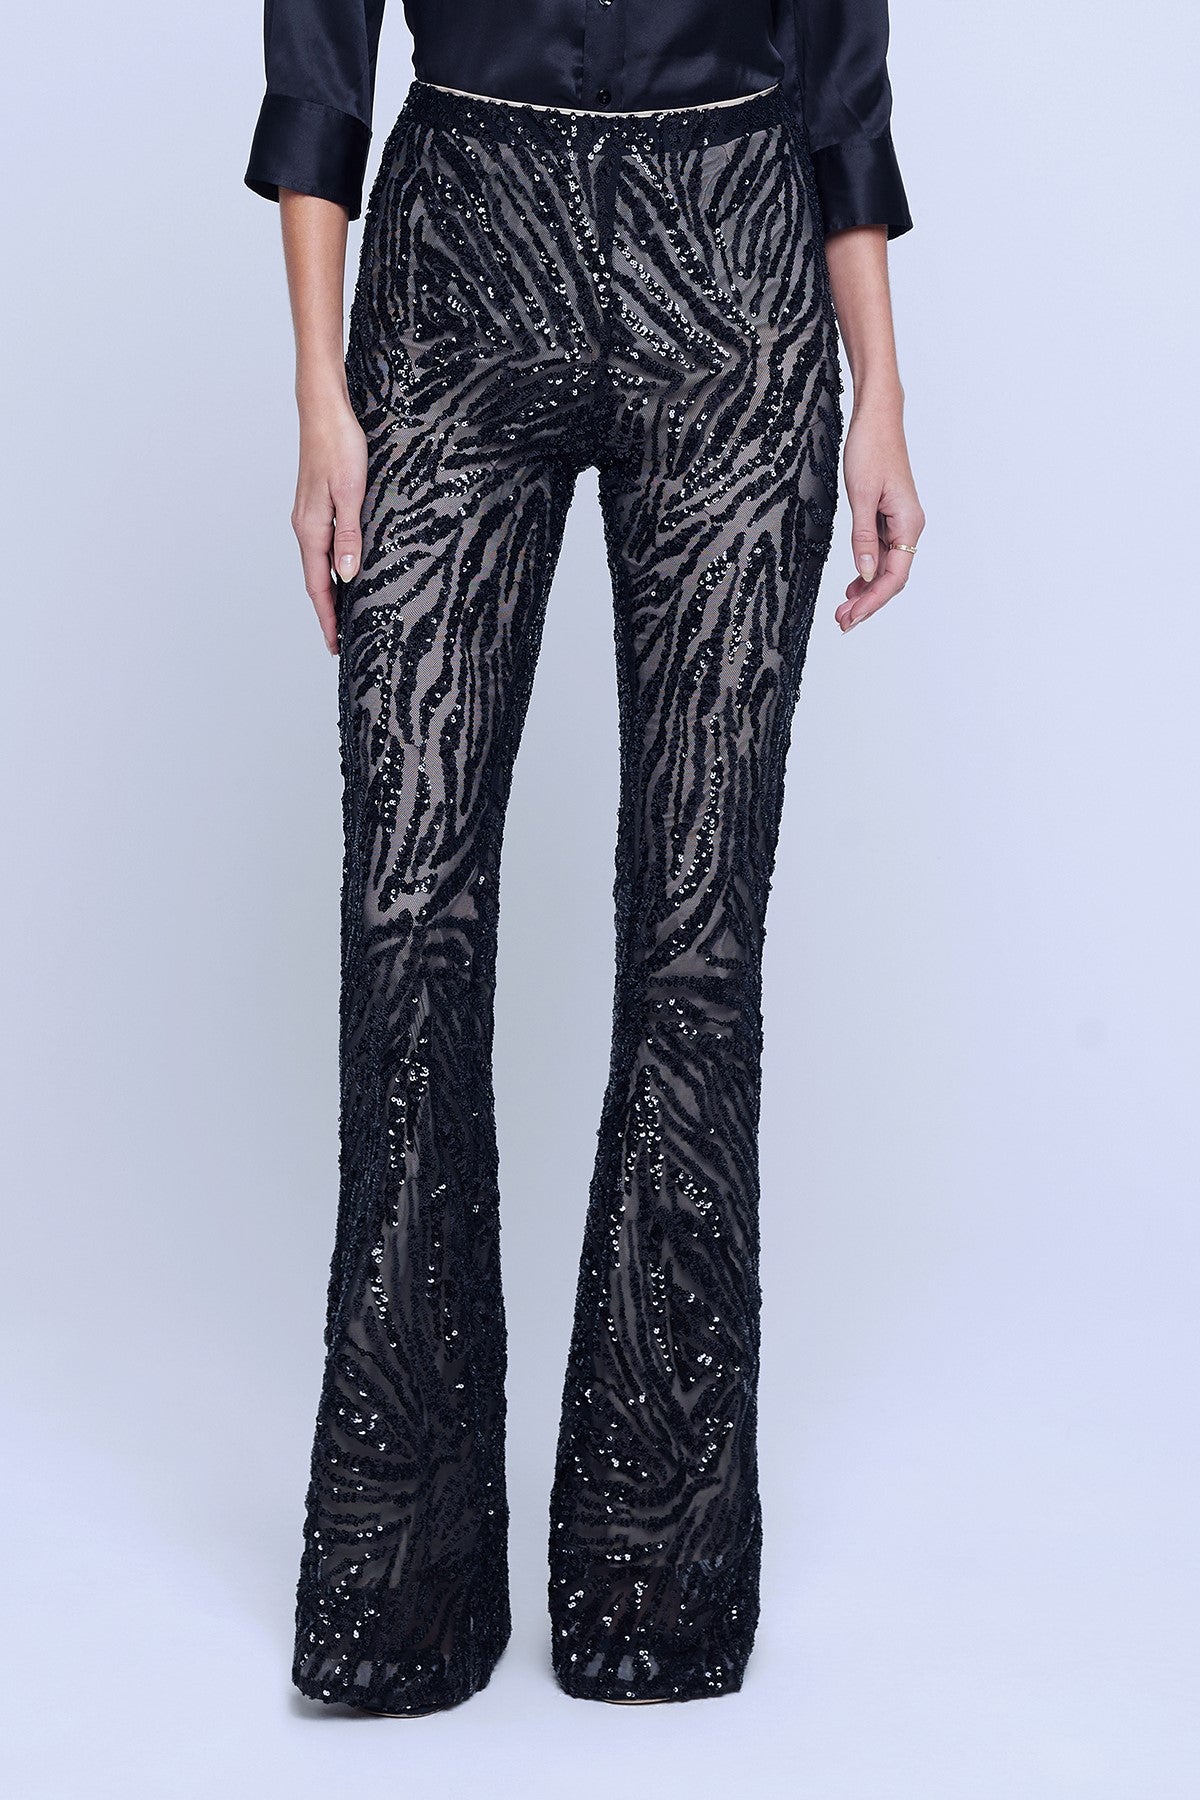 L'AGENCE 2781SNR HONOR FLARED  SEQUIN PANT